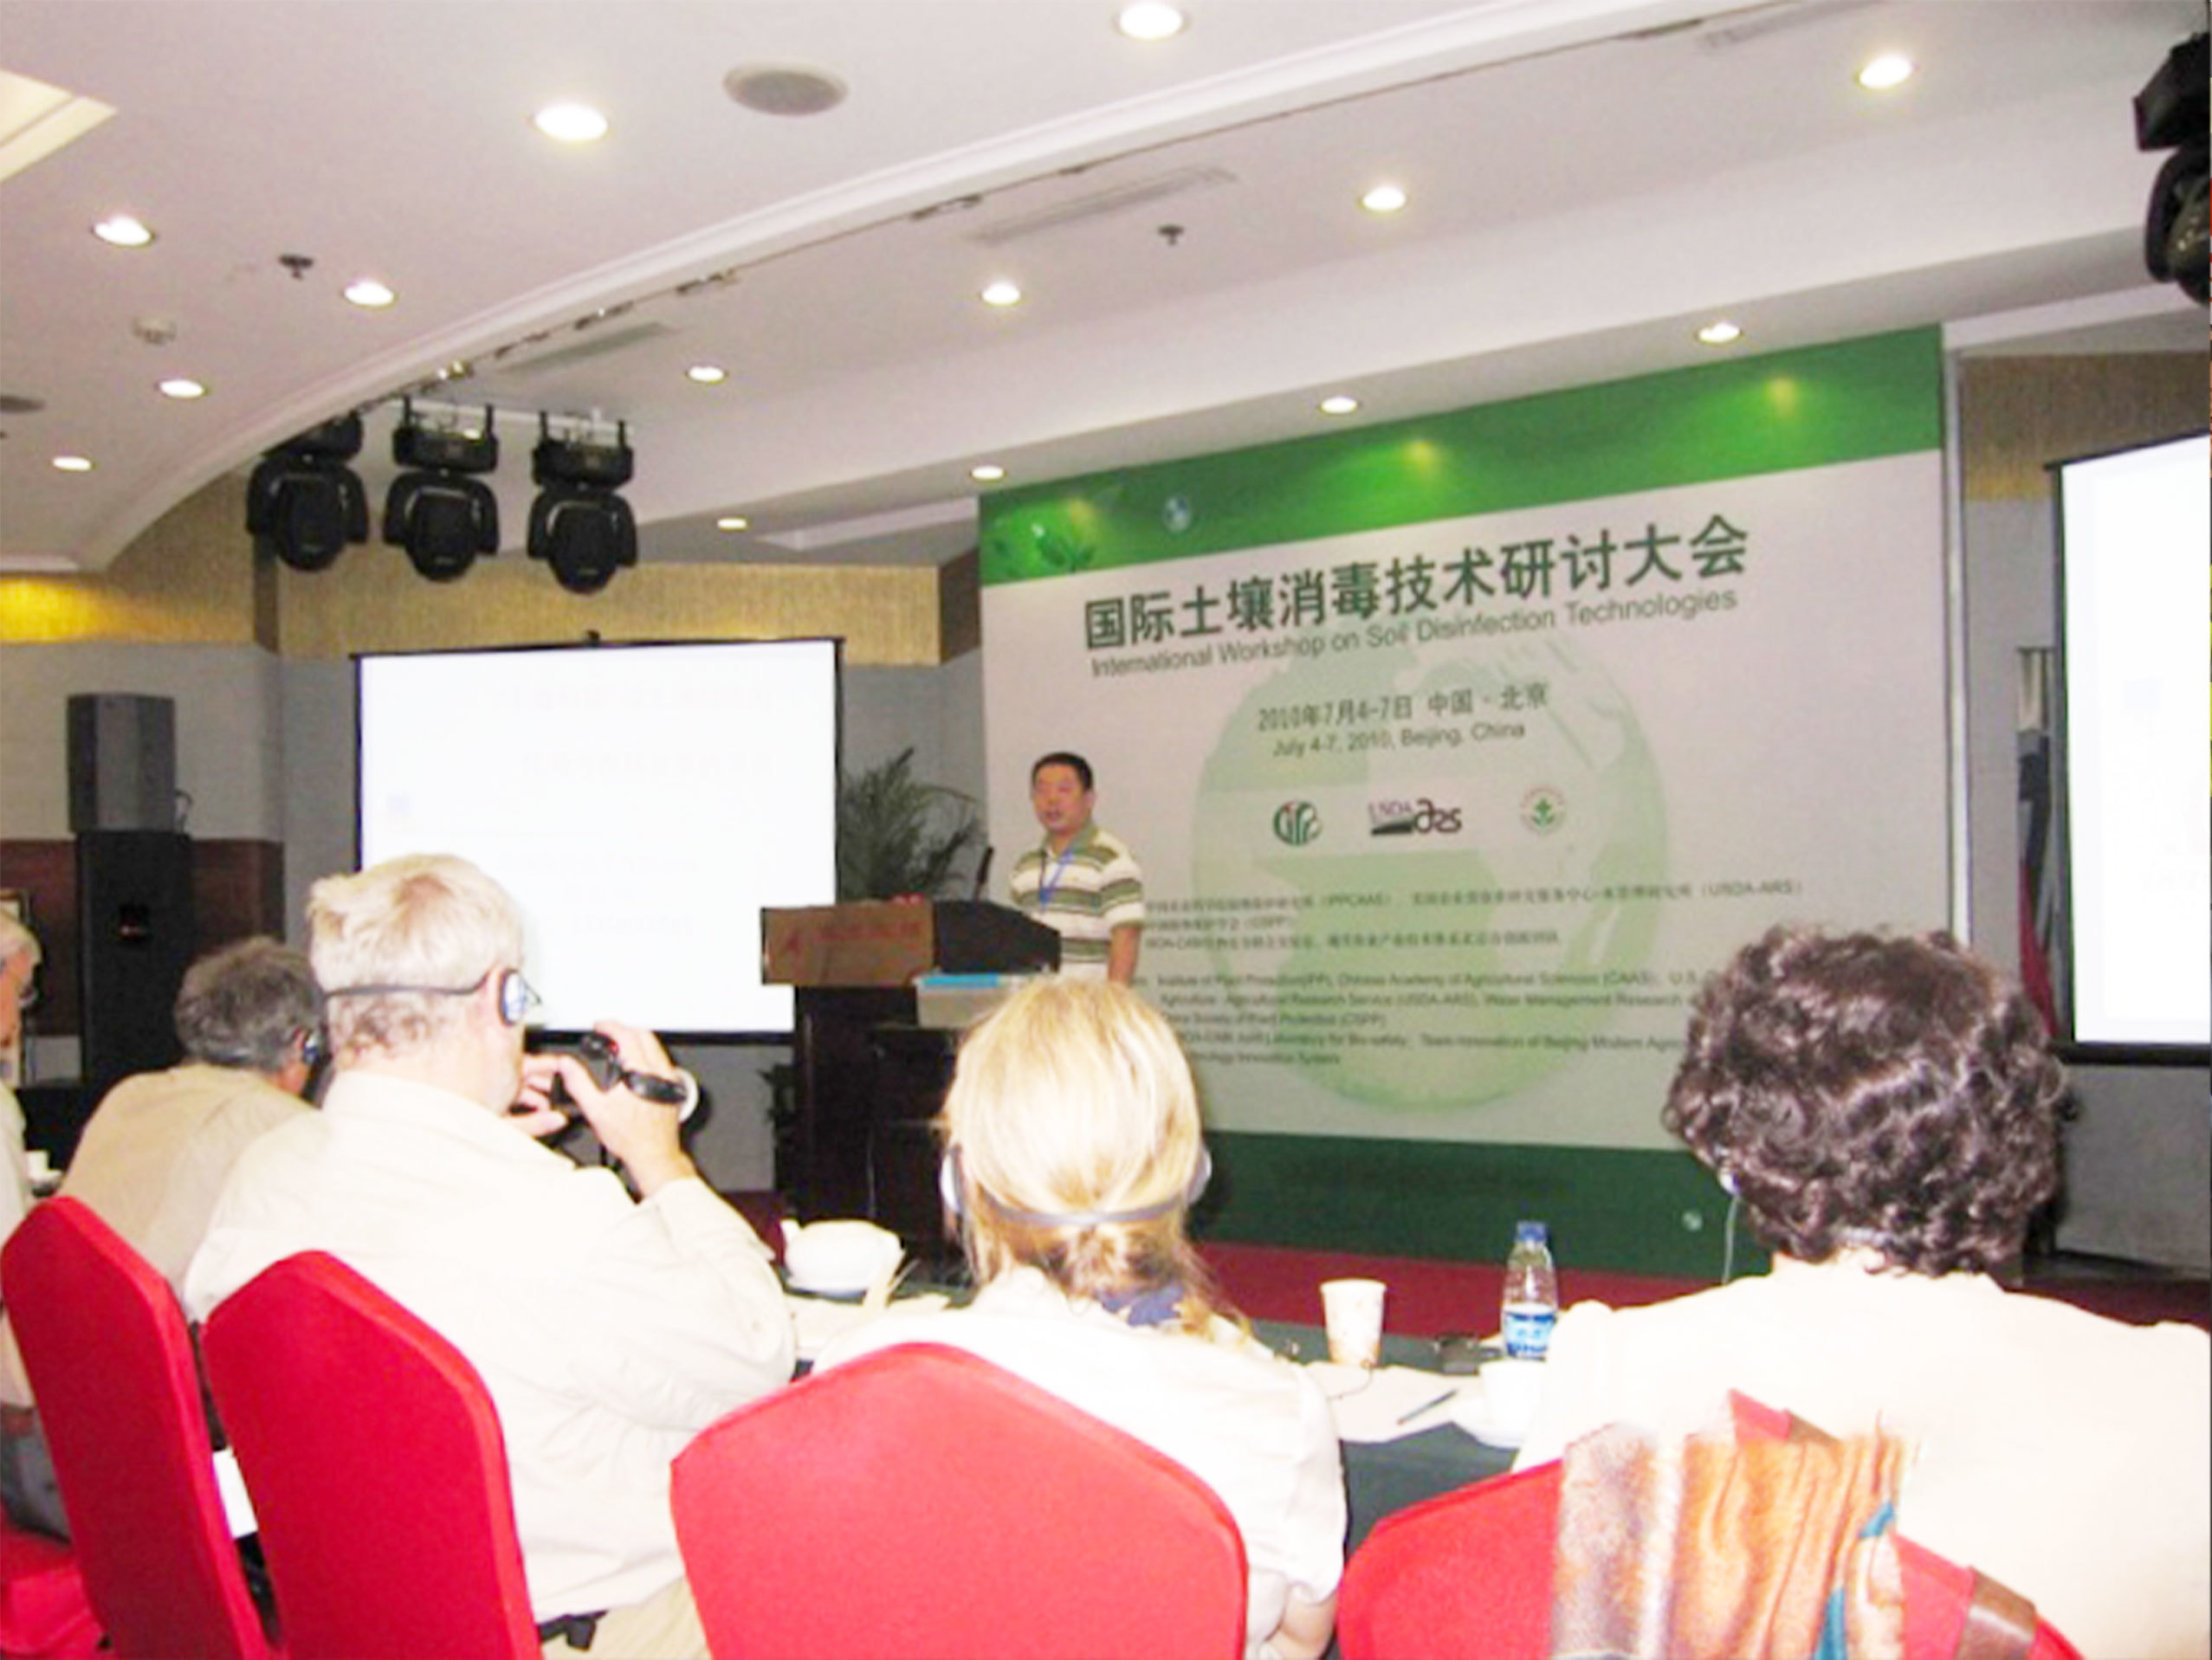 The methyl bromide elimination project evaluation meeting and alternative technology seminar were held in Beijing, and Nantong Shizhuang "Longxin Mianlong" attracted much attention.